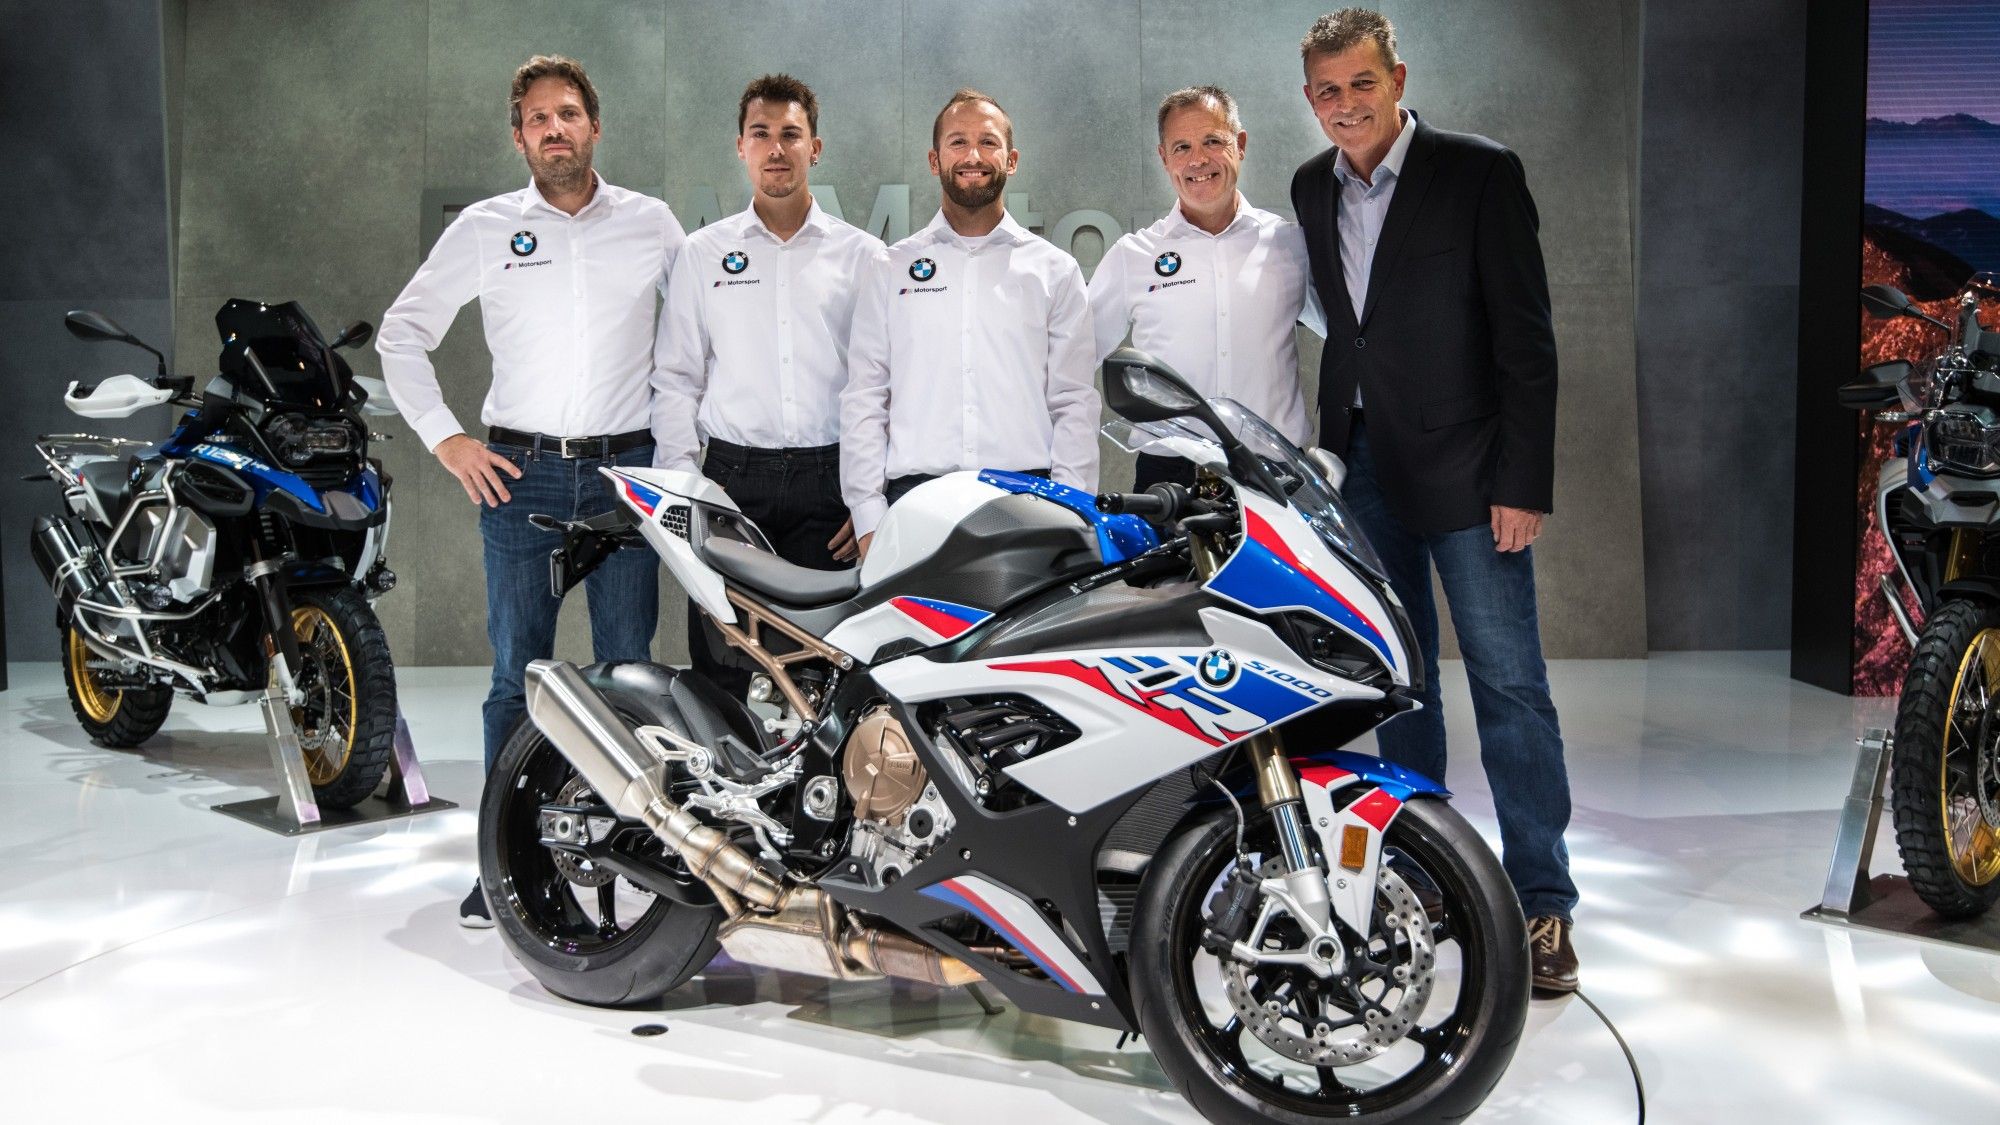 Wsbk トム サイクス 19 Bmwで参戦 Motor Racing For My Favorite Recollections 楽天ブログ